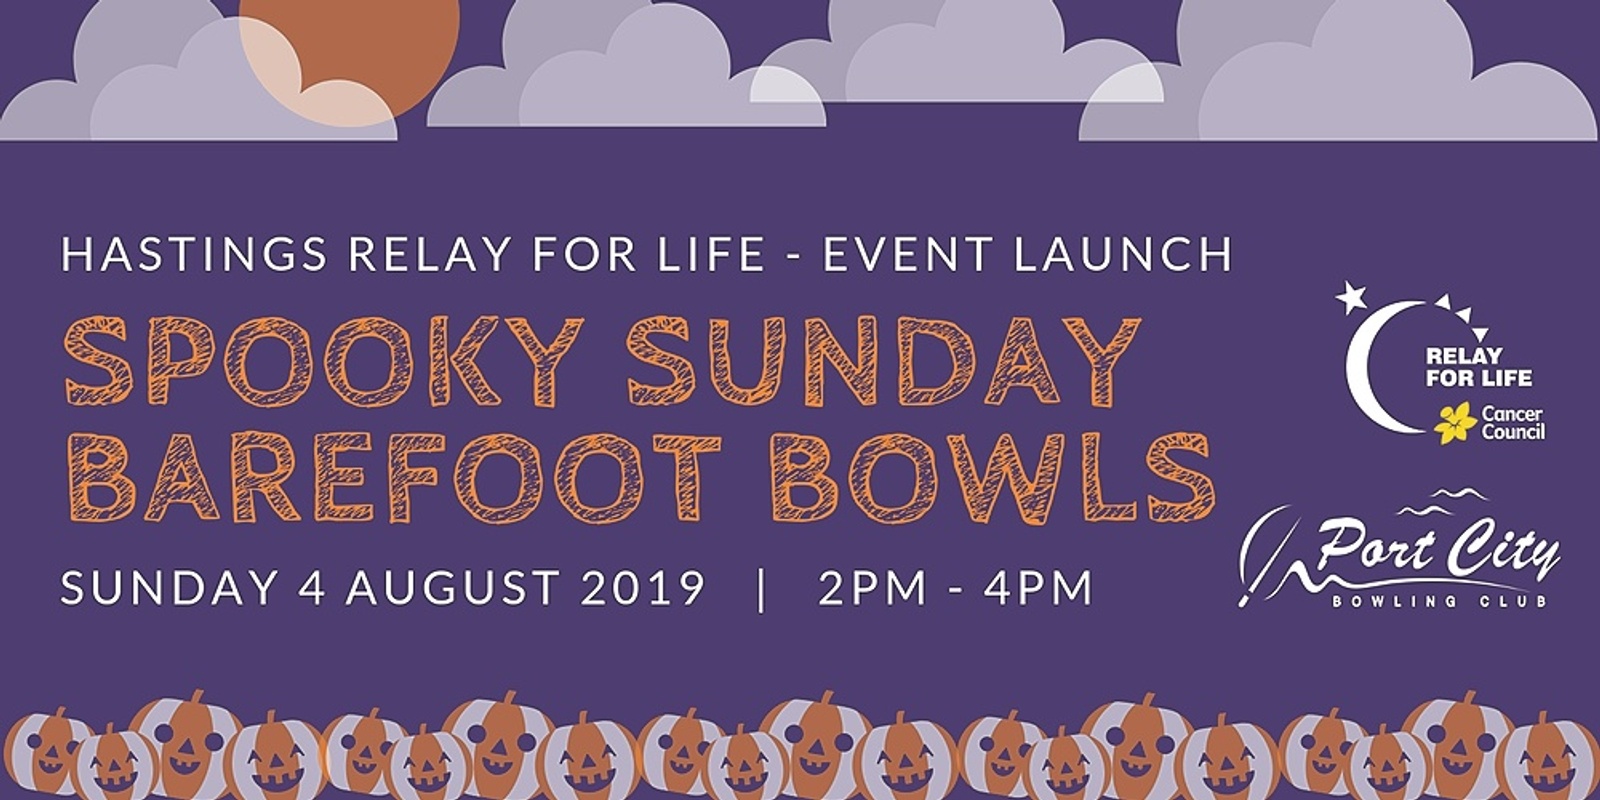 Banner image for Hastings Relay for Life Launch - Barefoot Bowls Party